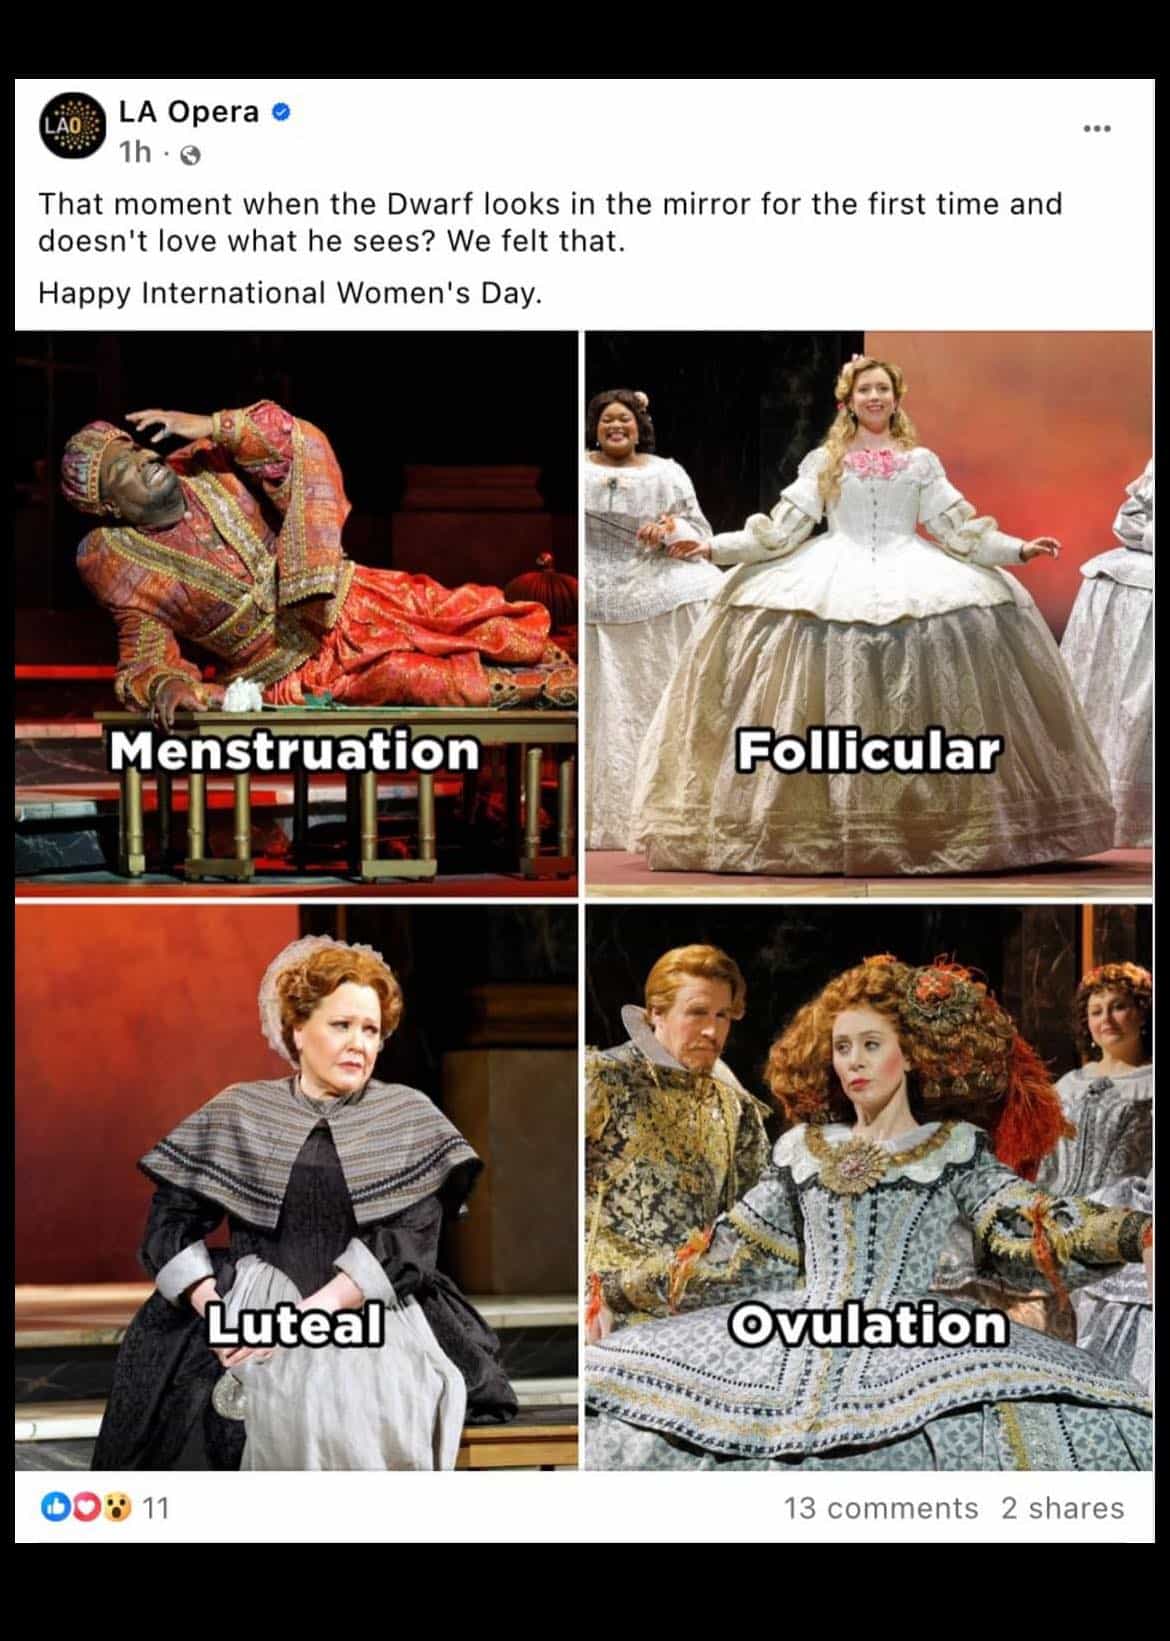 LA Opera gets messed up in women’s bodily functions